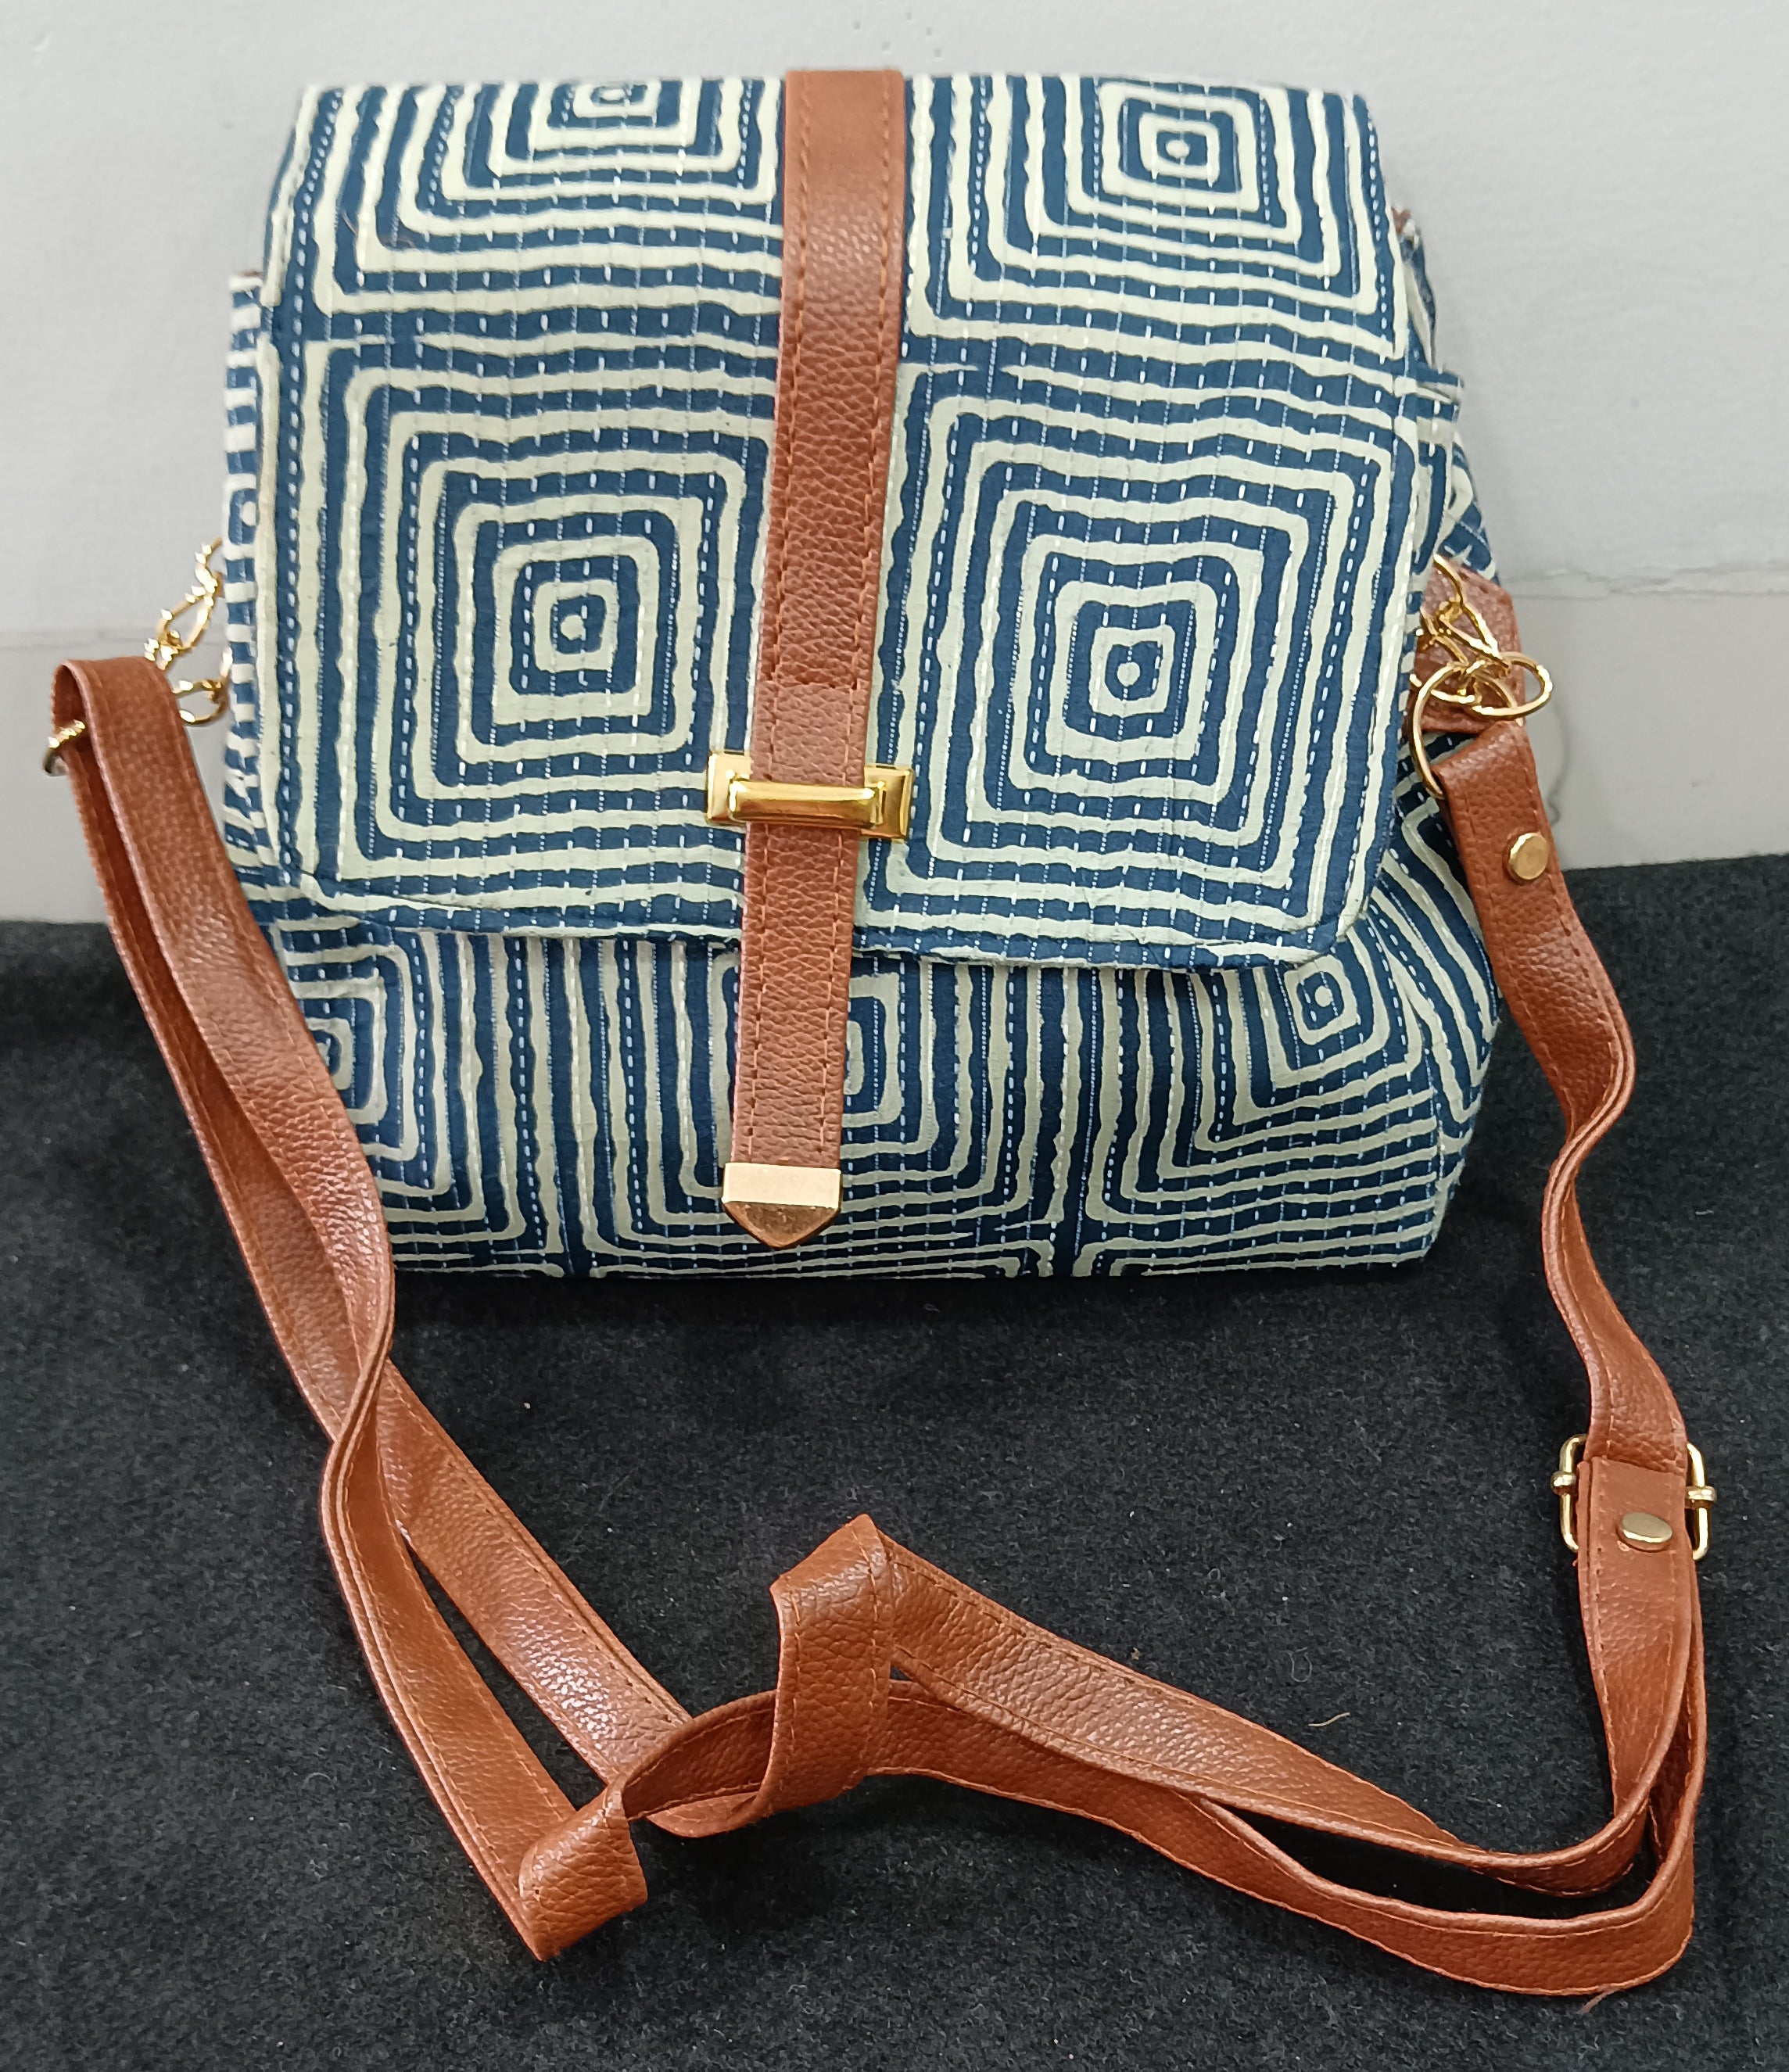 Tote Bag In Natural Color With Handwork – Kritenya-Handwoven & Handcrafted  accessories.